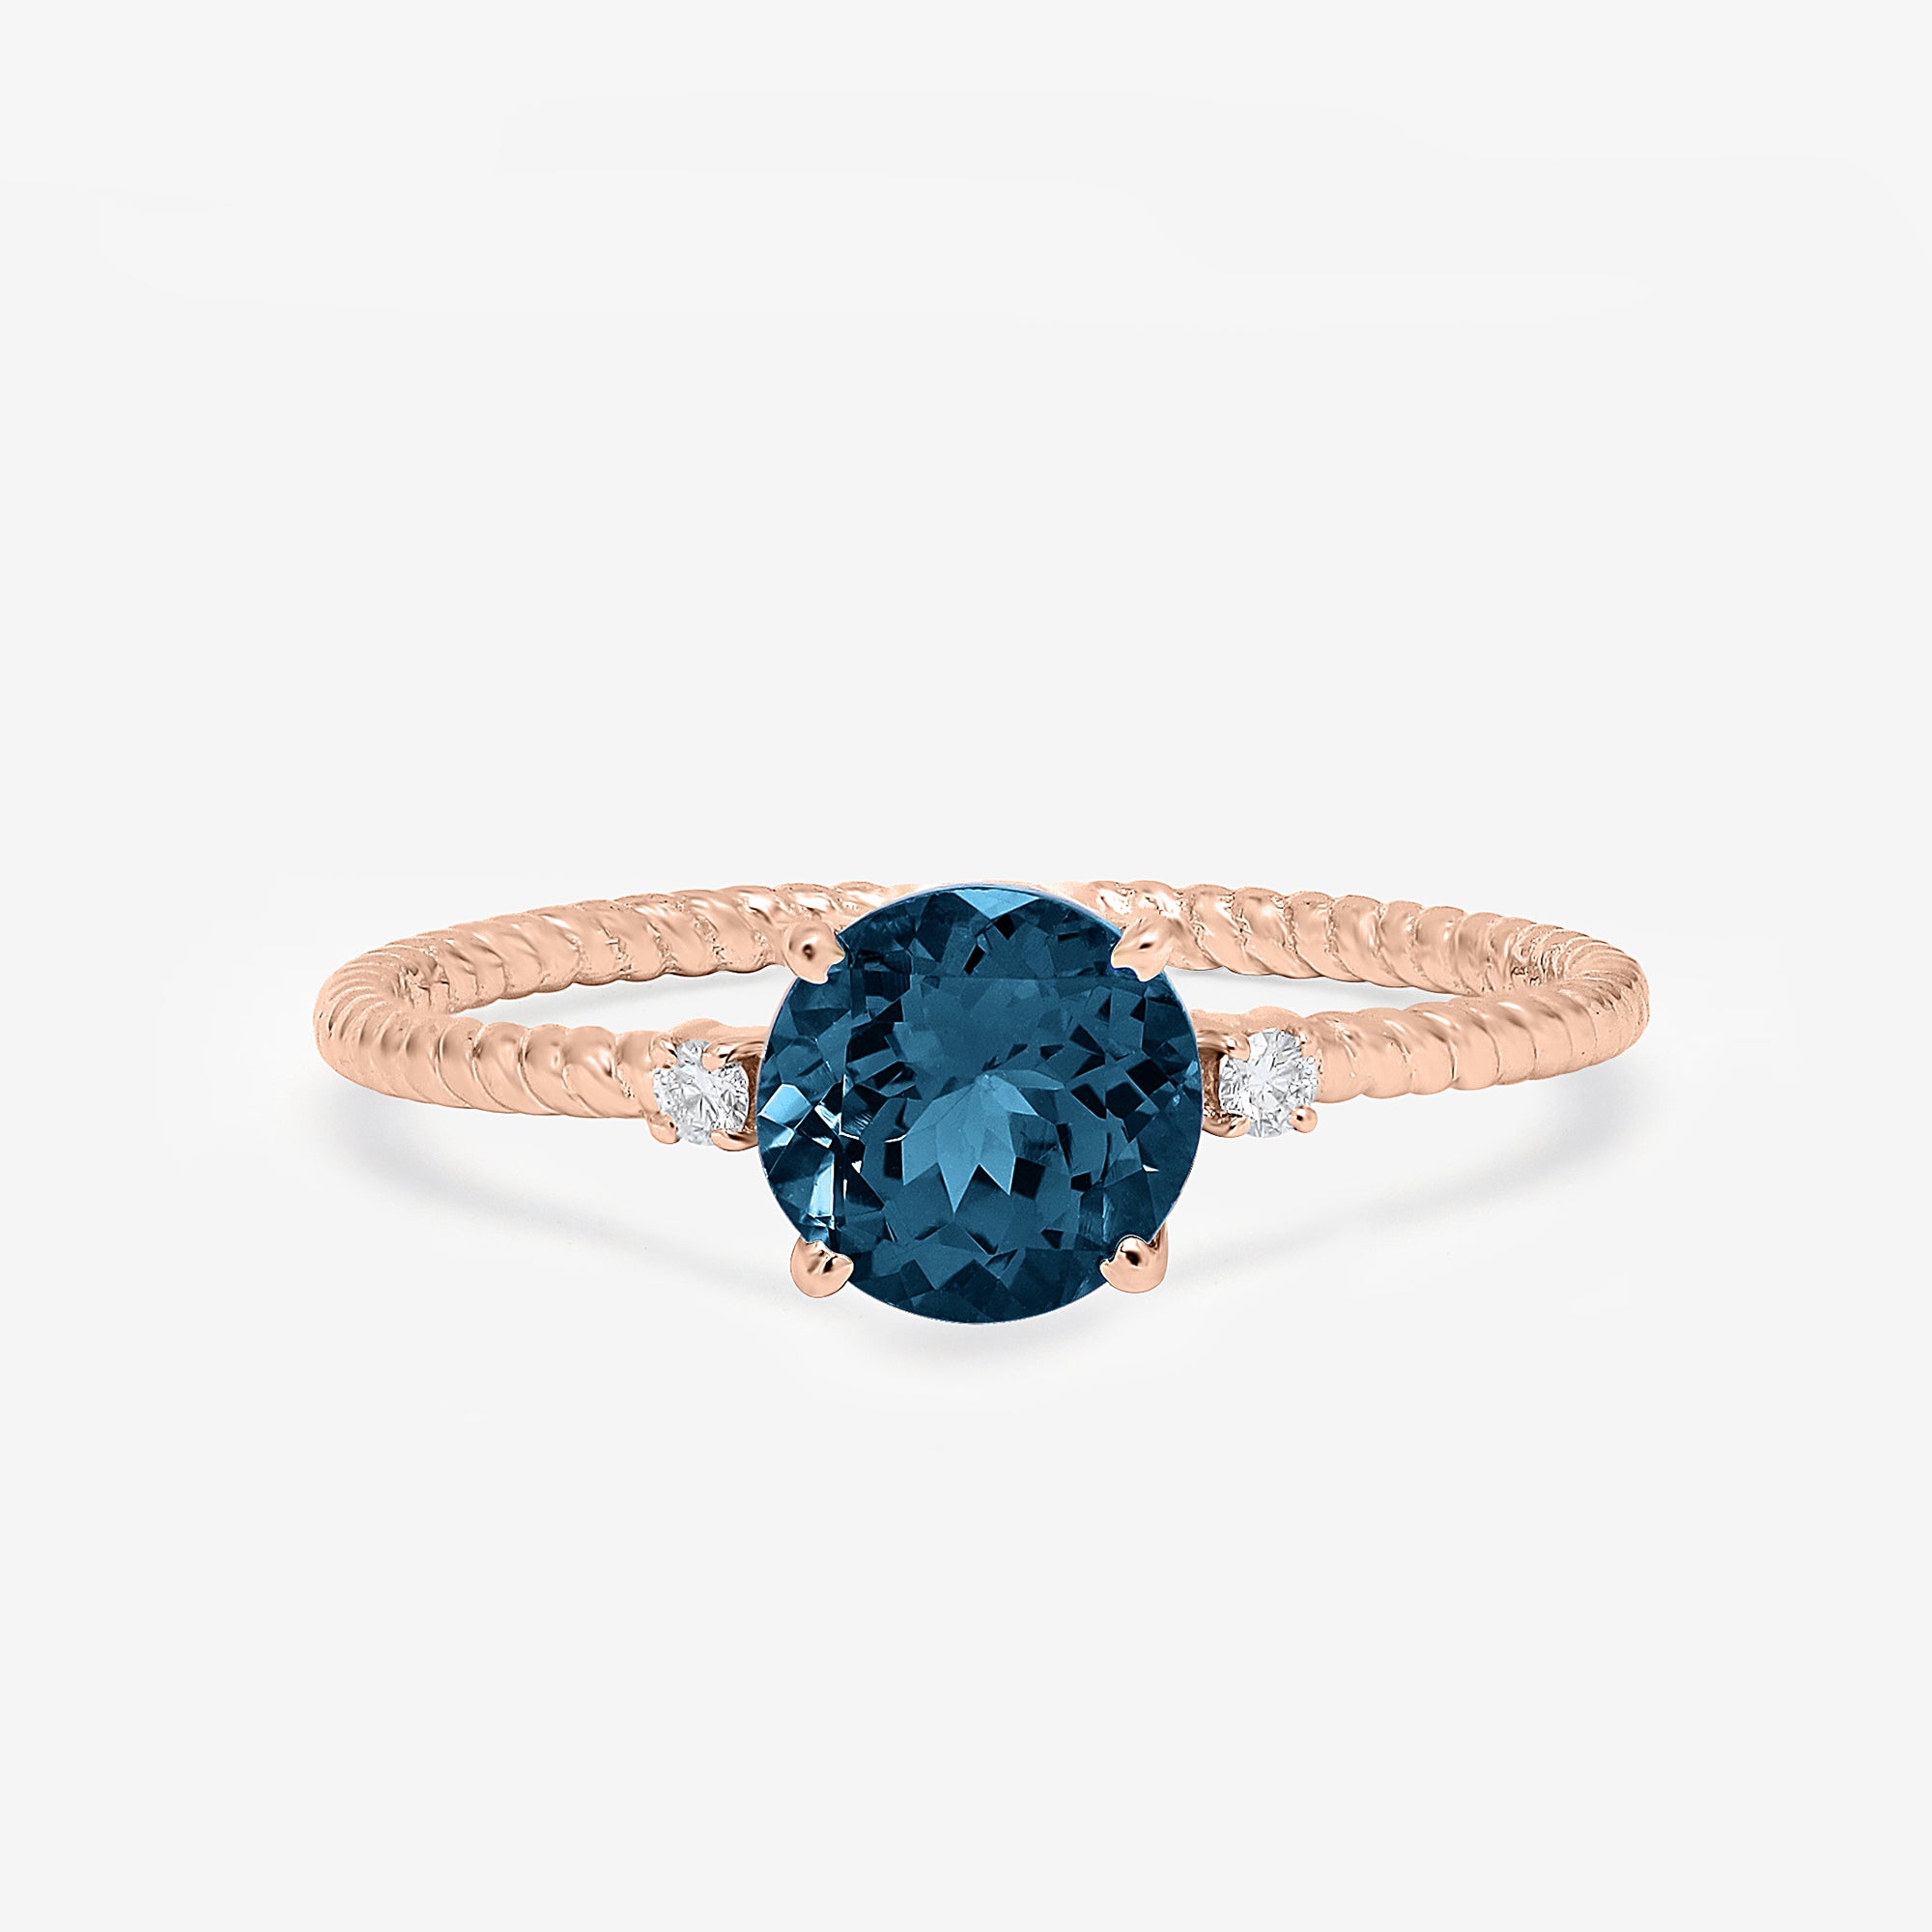 London Blue Topaz Engagement Ring, 14K Solid Gold Ring, Wedding Ring, Gift For Her